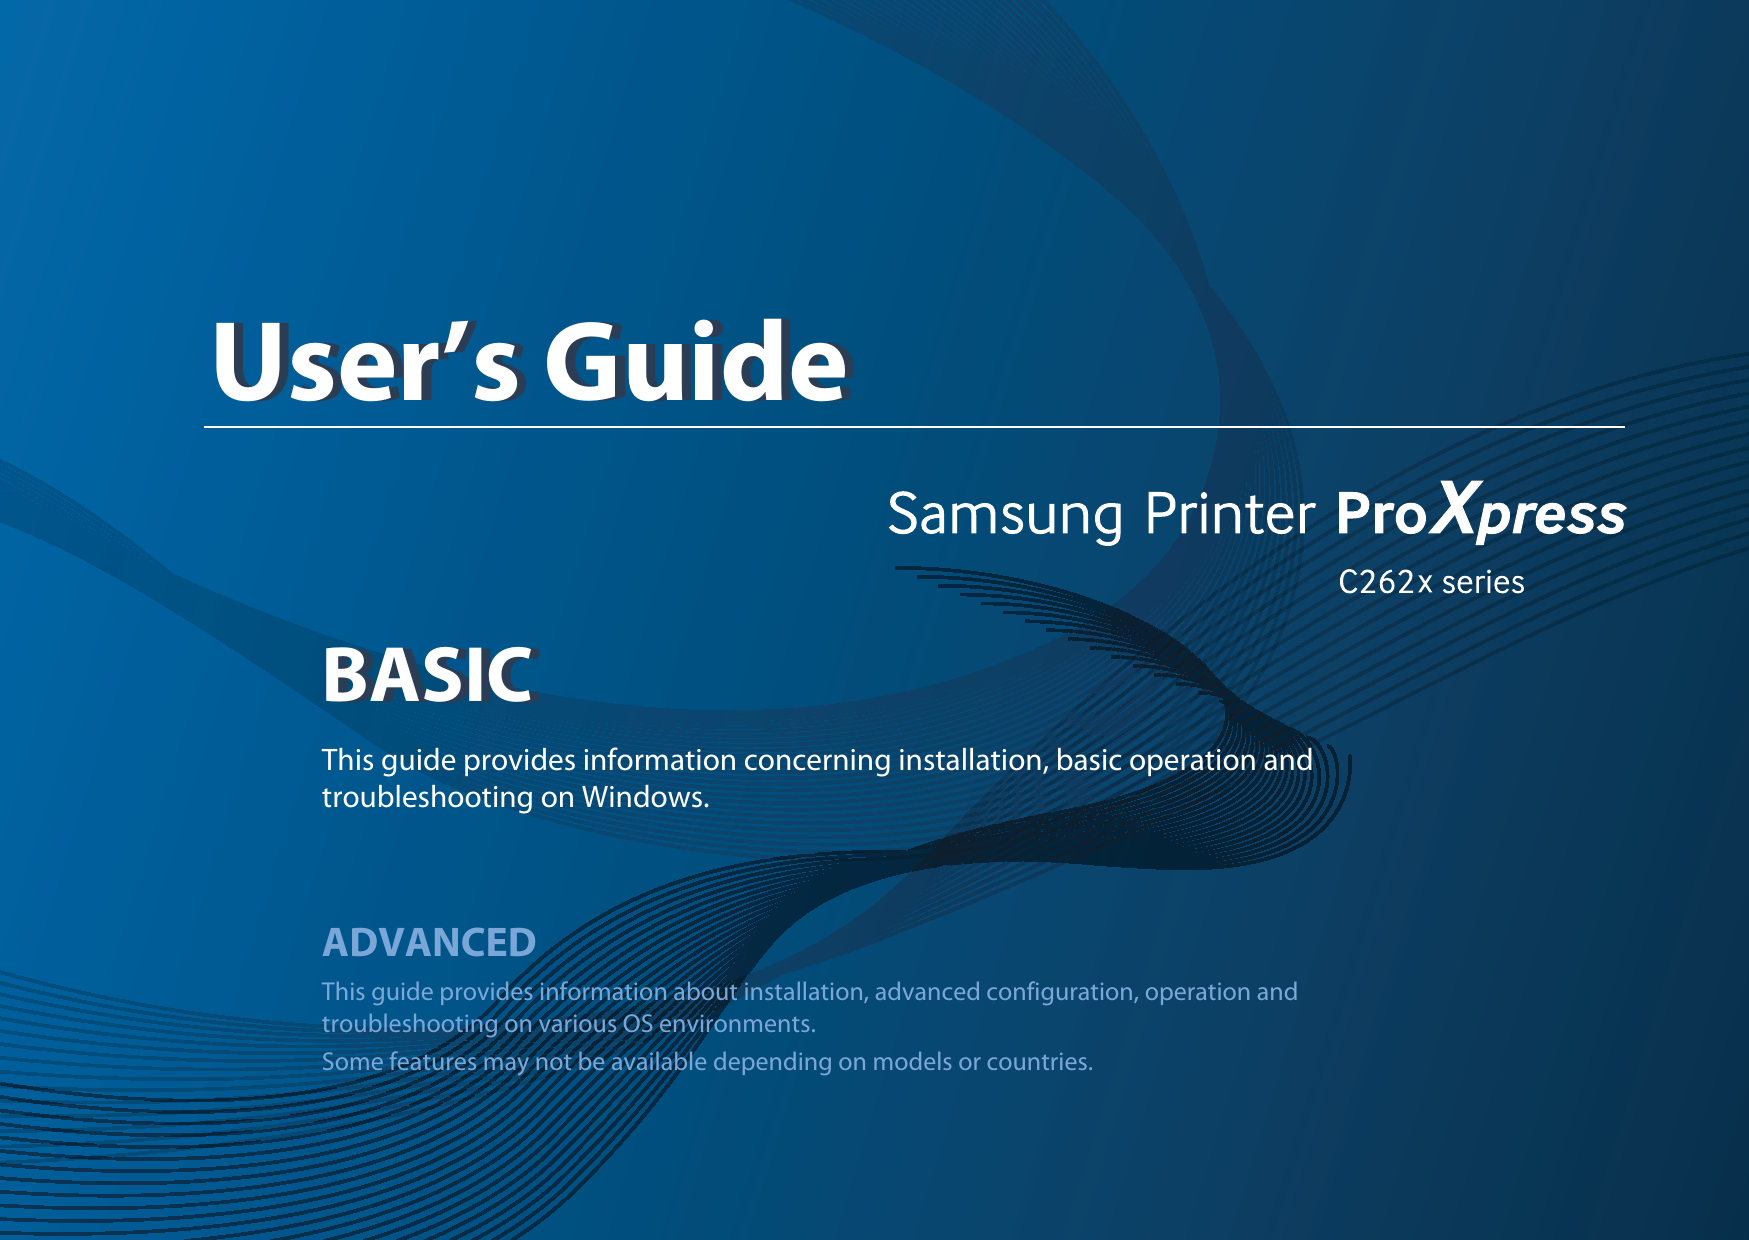 BASICUser’s GuideBASICUser’s GuideThis guide provides information concerning installation, basic operation and troubleshooting on Windows.ADVANCEDThis guide provides information about installation, advanced configuration, operation and troubleshooting on various OS environments. Some features may not be available depending on models or countries.